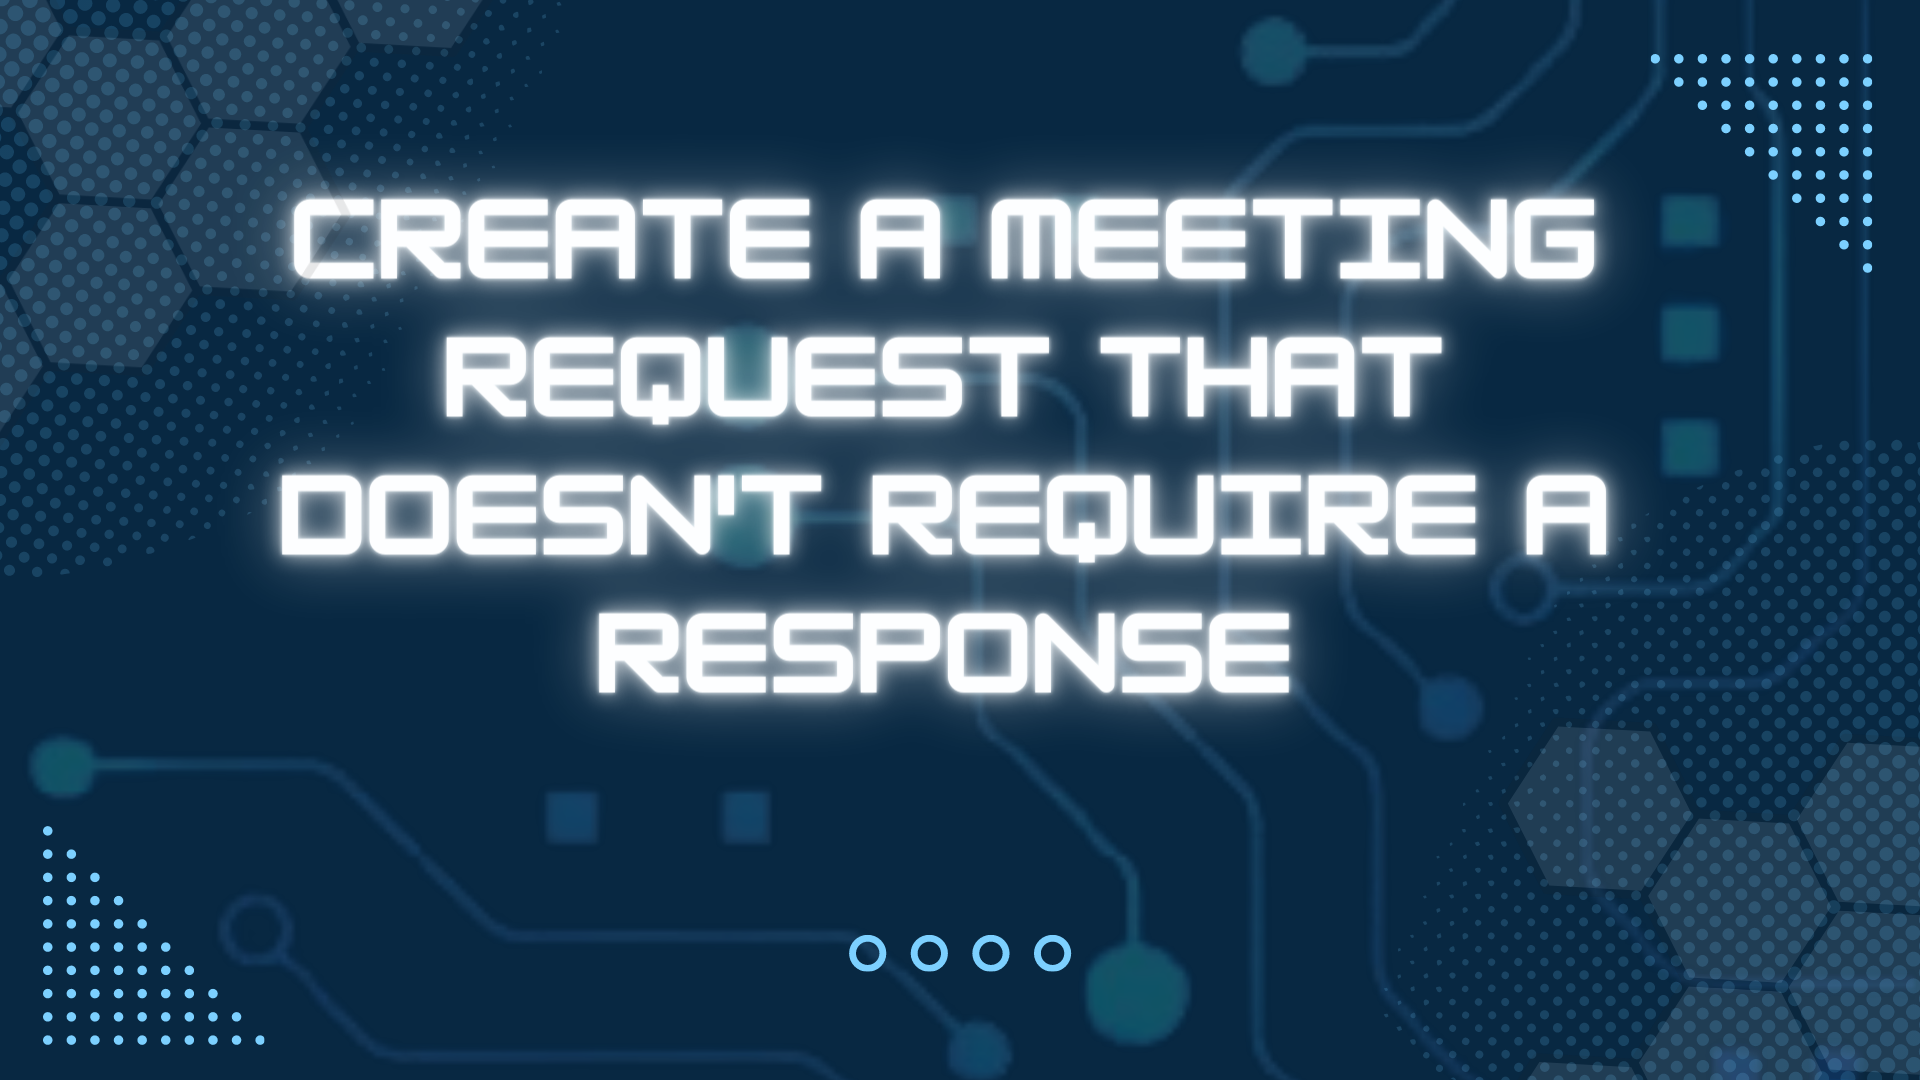 Create a meeting request that doesn't require a response in Outlook